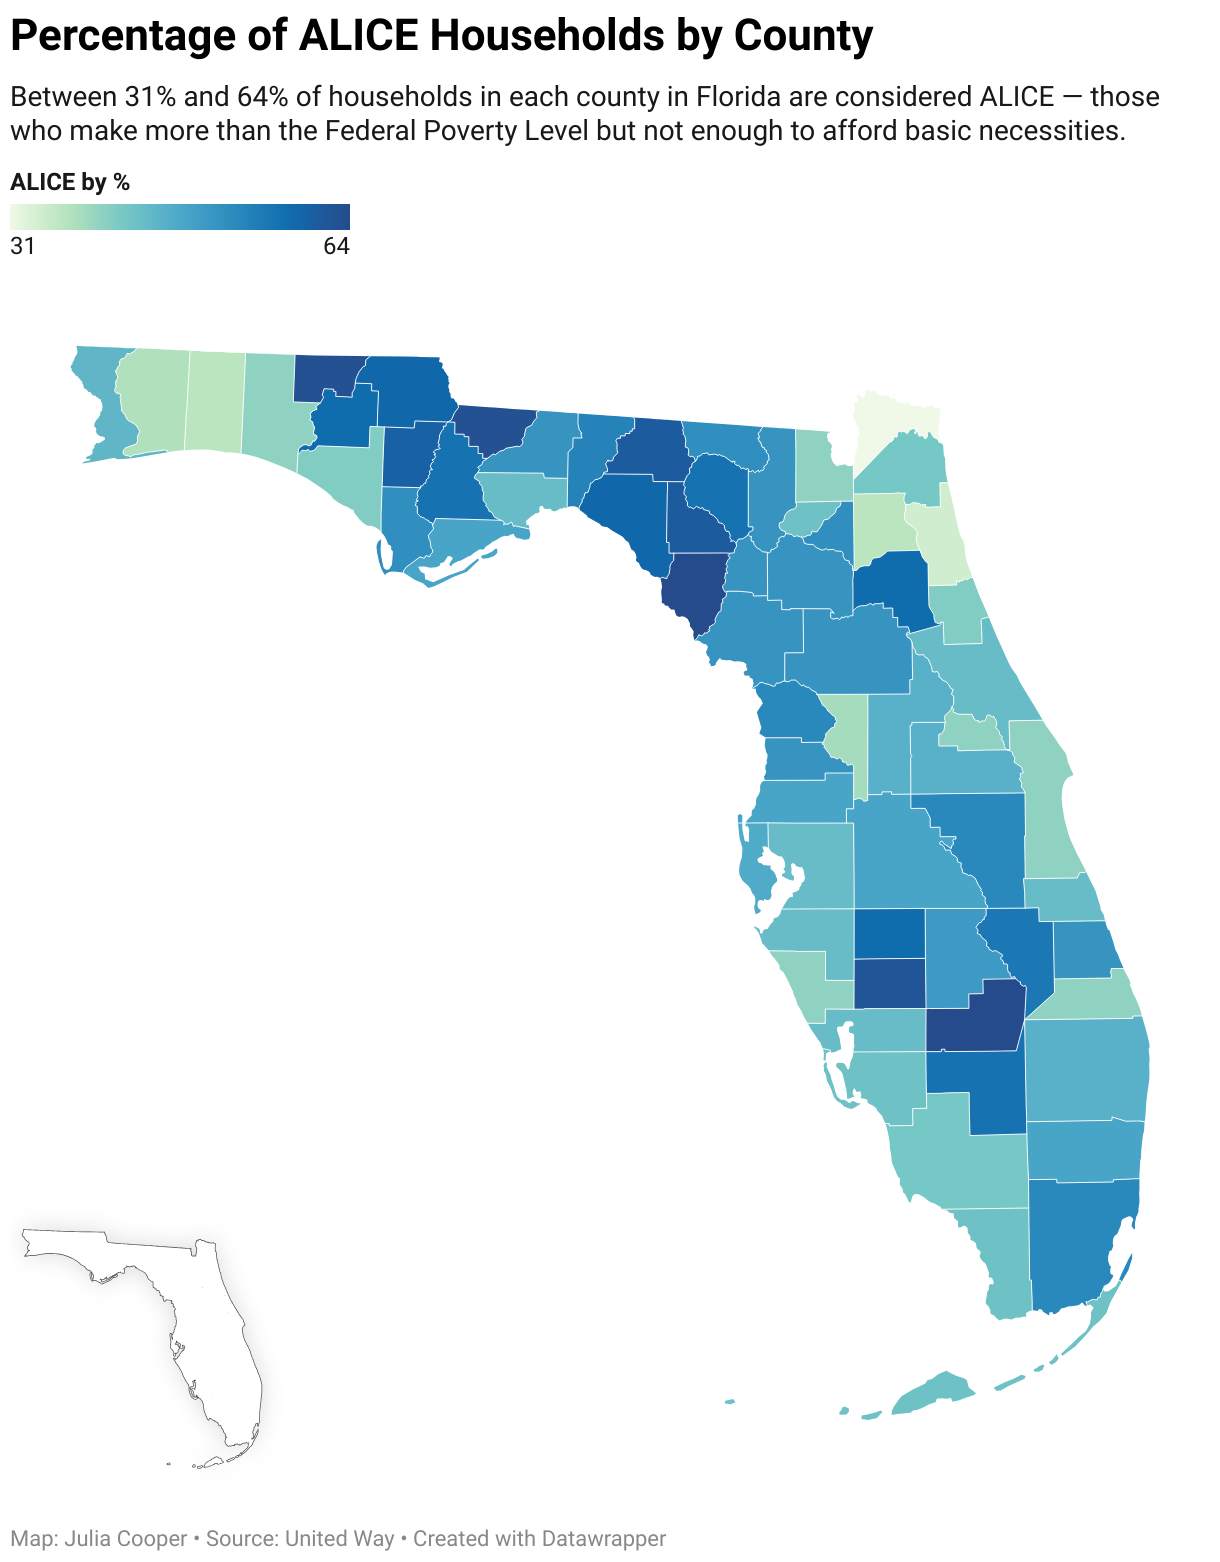 Between 31% and 64% of each county in Florida are considered ALICE households— those who make more than the Federal Poverty Level but not enough to afford basic necessities.